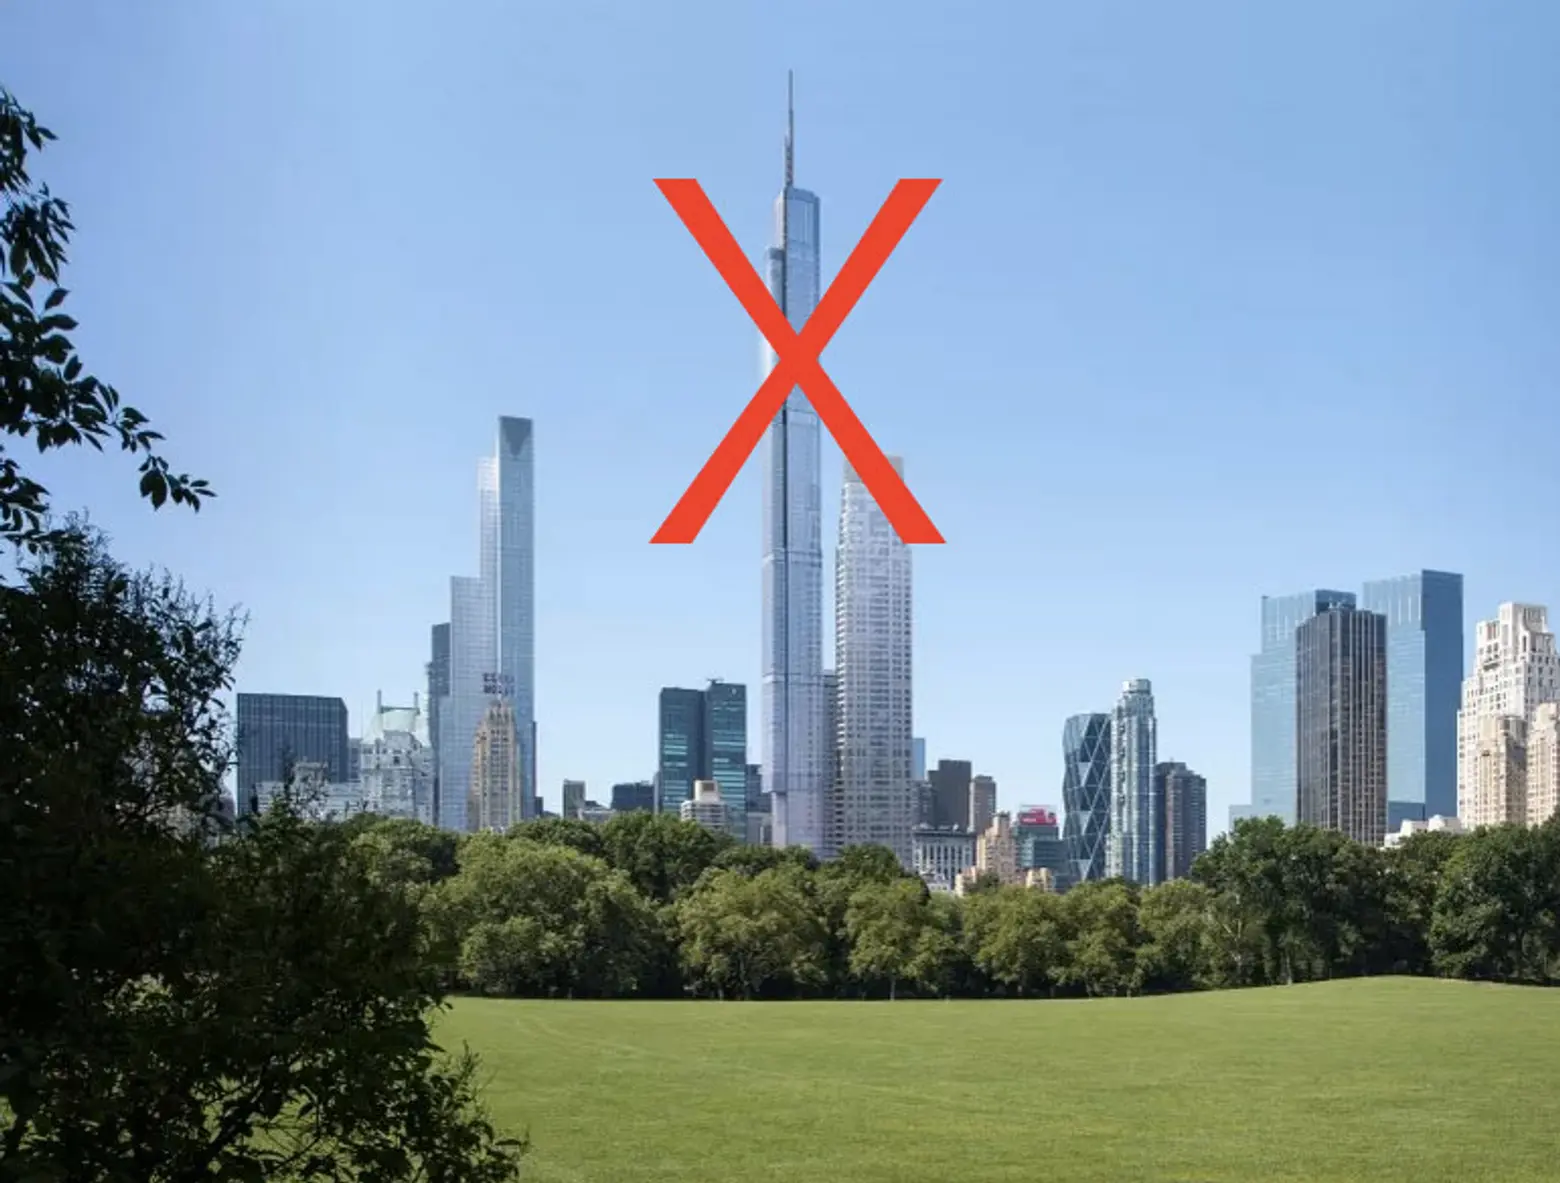 The Final Design of Extell’s Nordstrom Tower Still Undecided